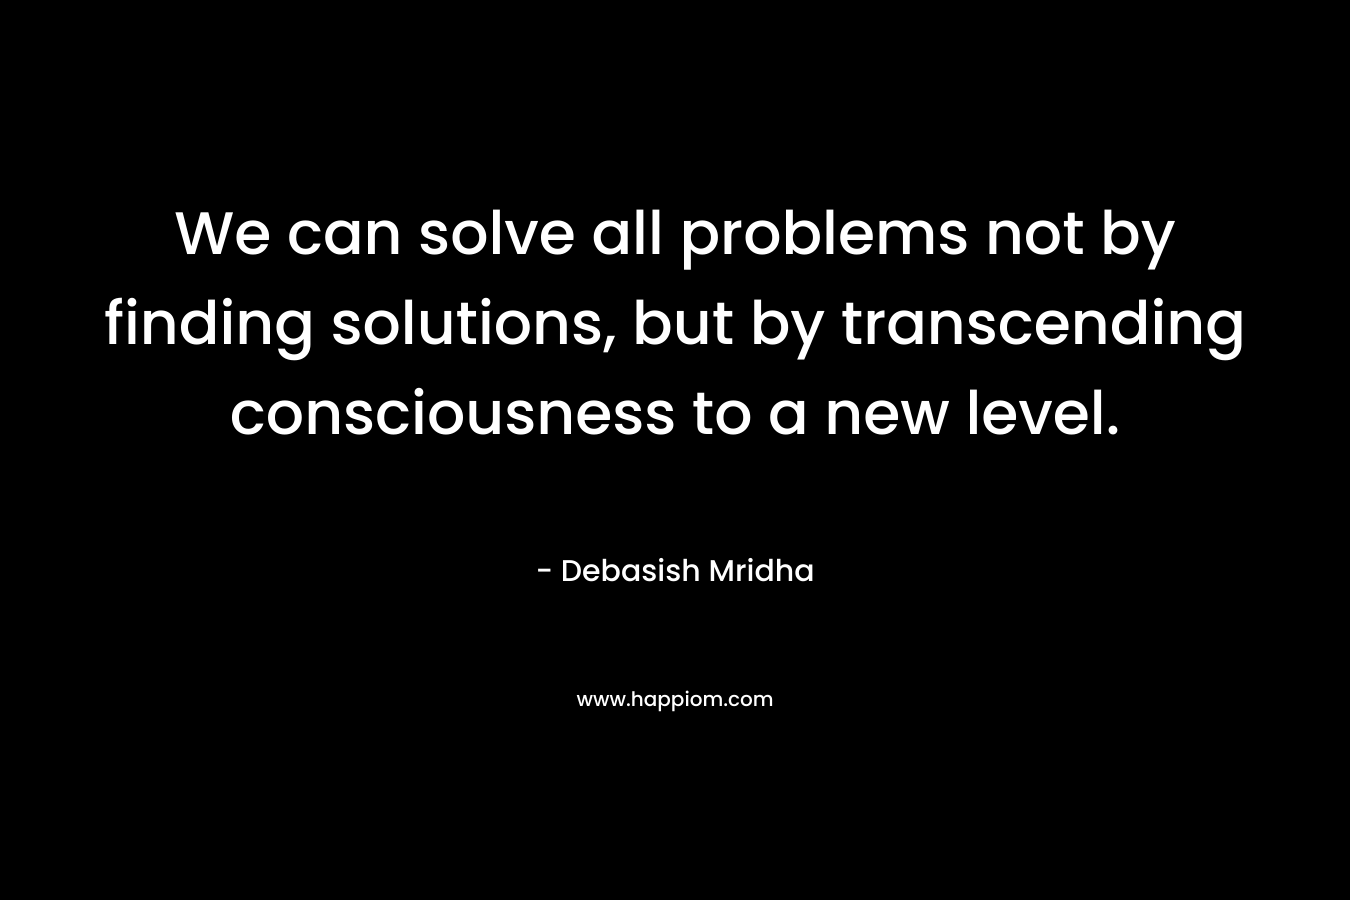 We can solve all problems not by finding solutions, but by transcending consciousness to a new level.